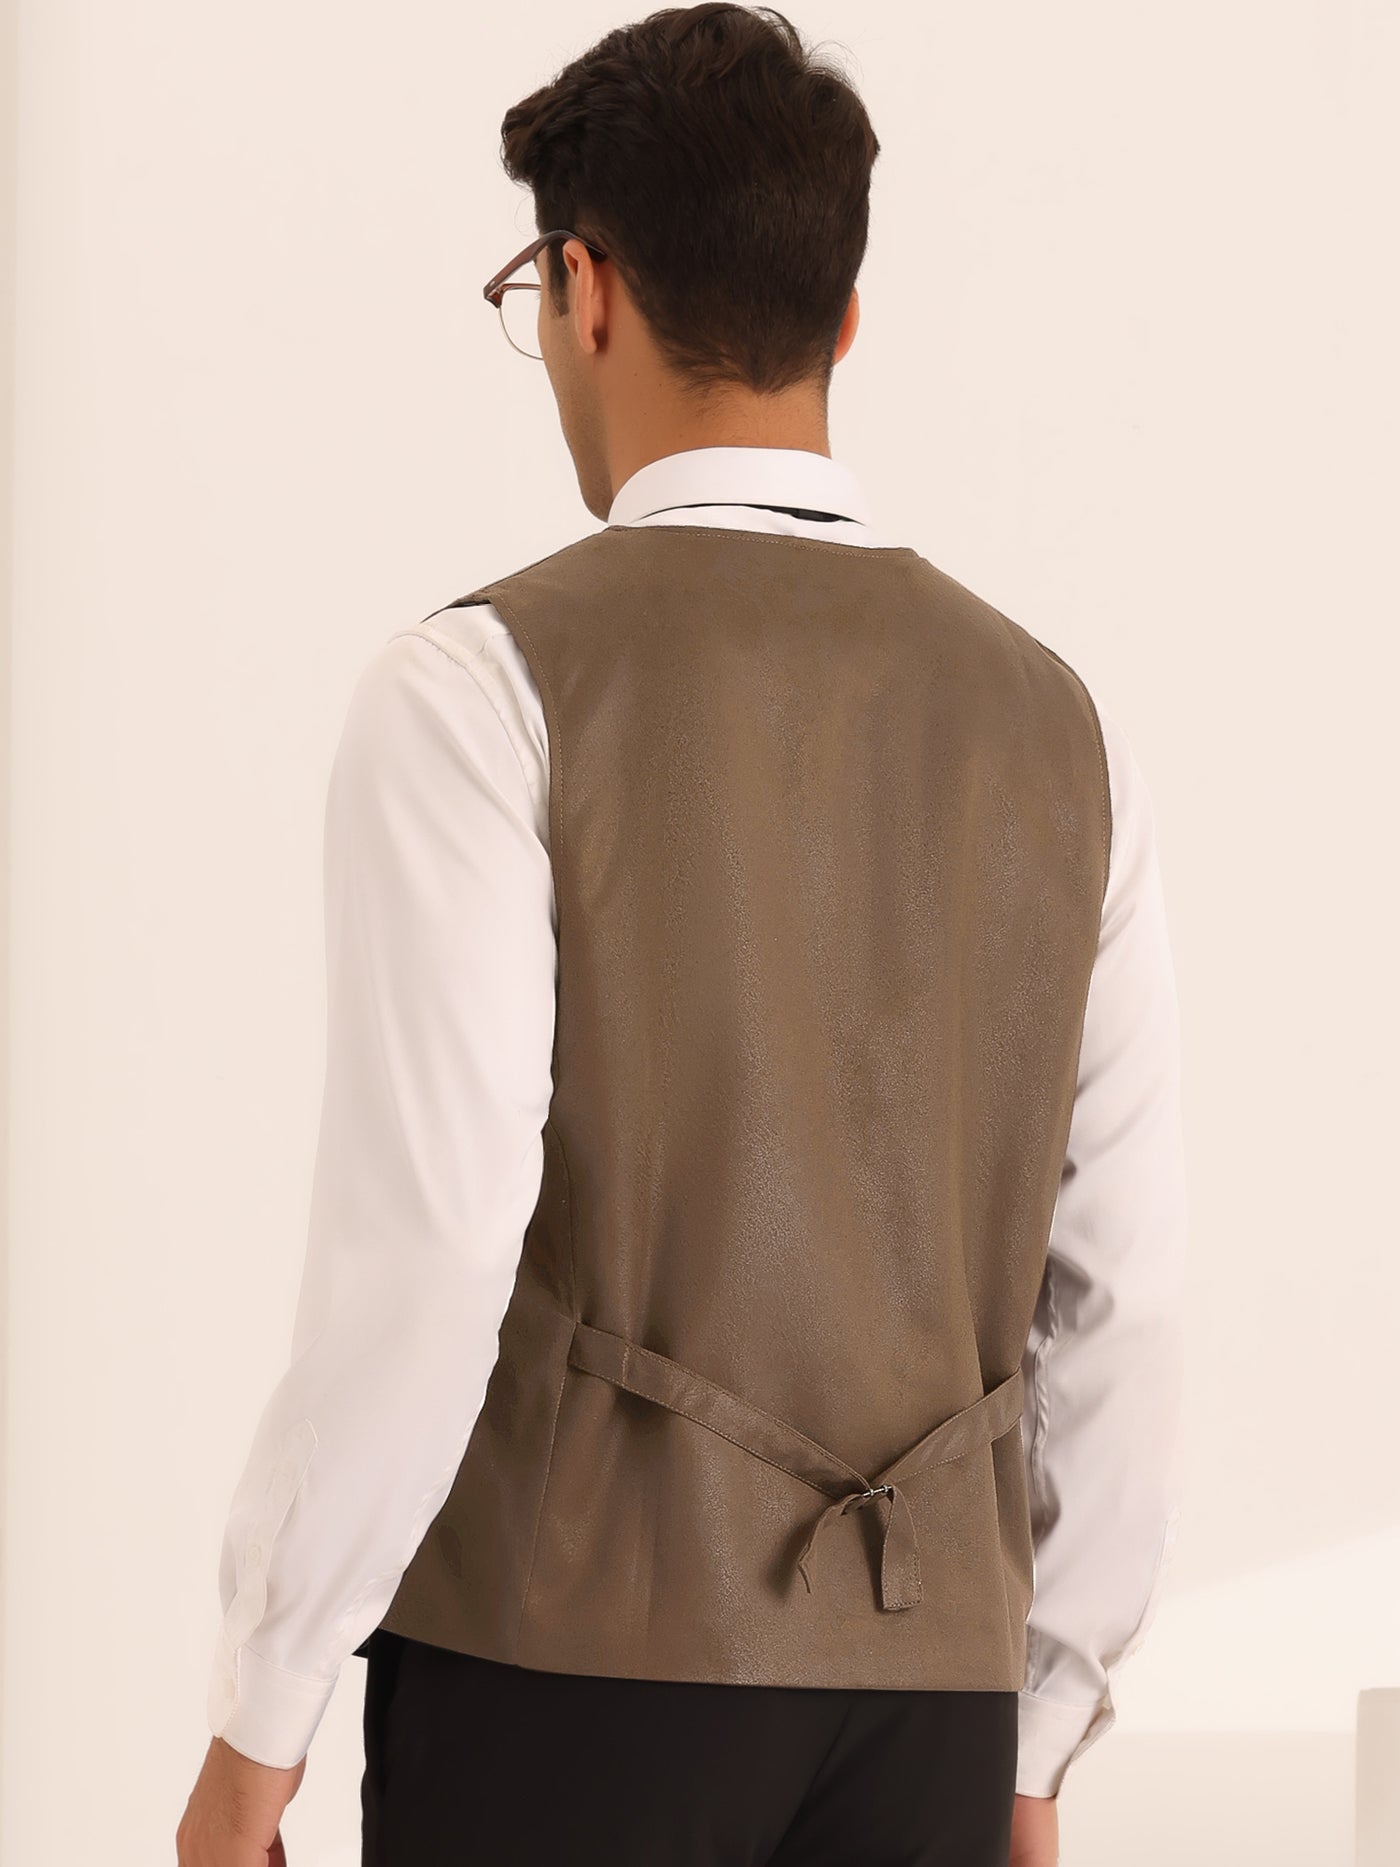 Bublédon Suede Waistcoat for Men's Single Breasted Slim Fit Business Western Suit Vests